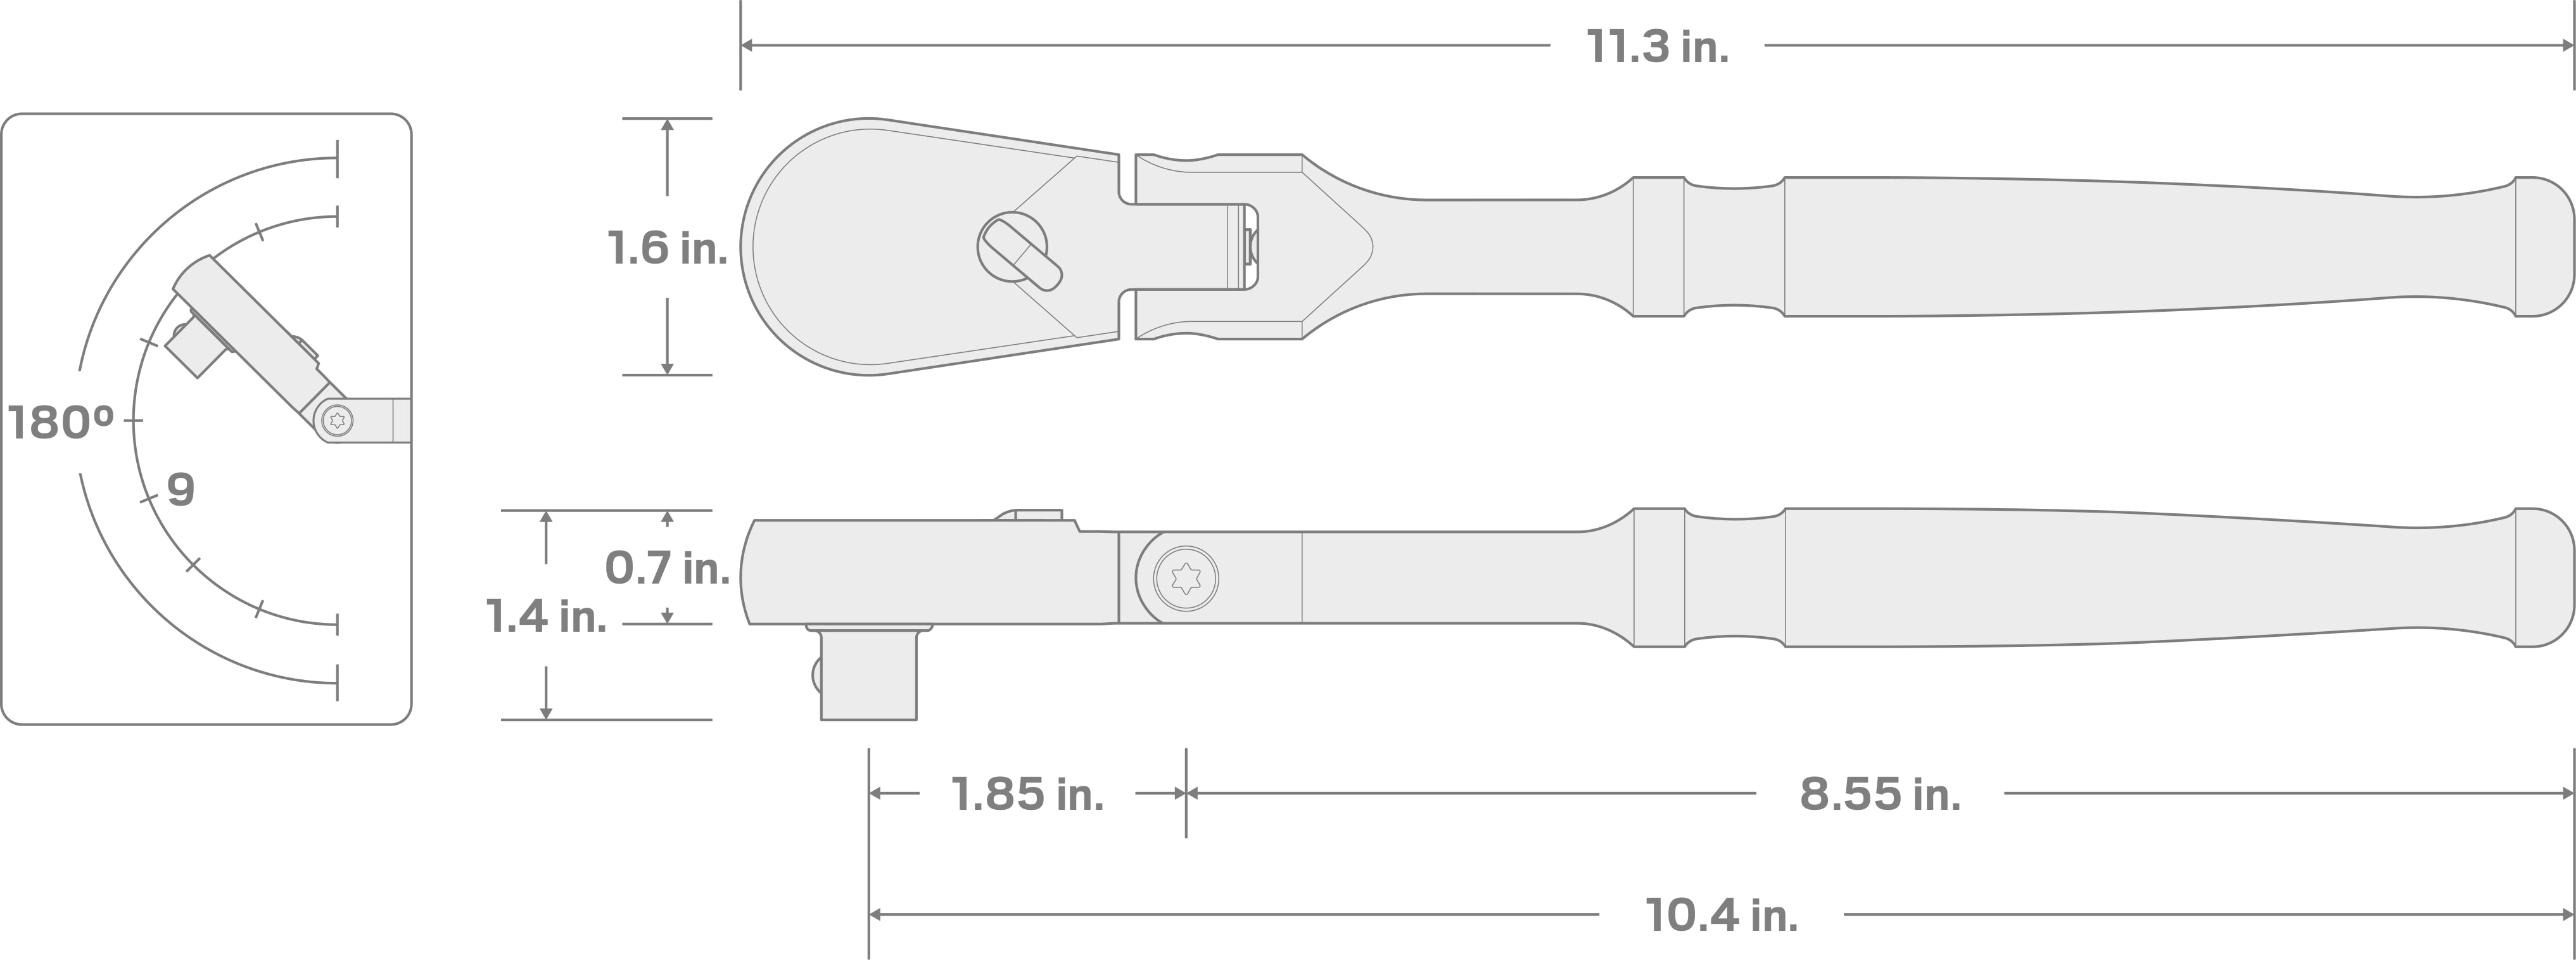 Specs for 1/2 Inch Drive x 10-1/2 Inch Flex Head Ratchet